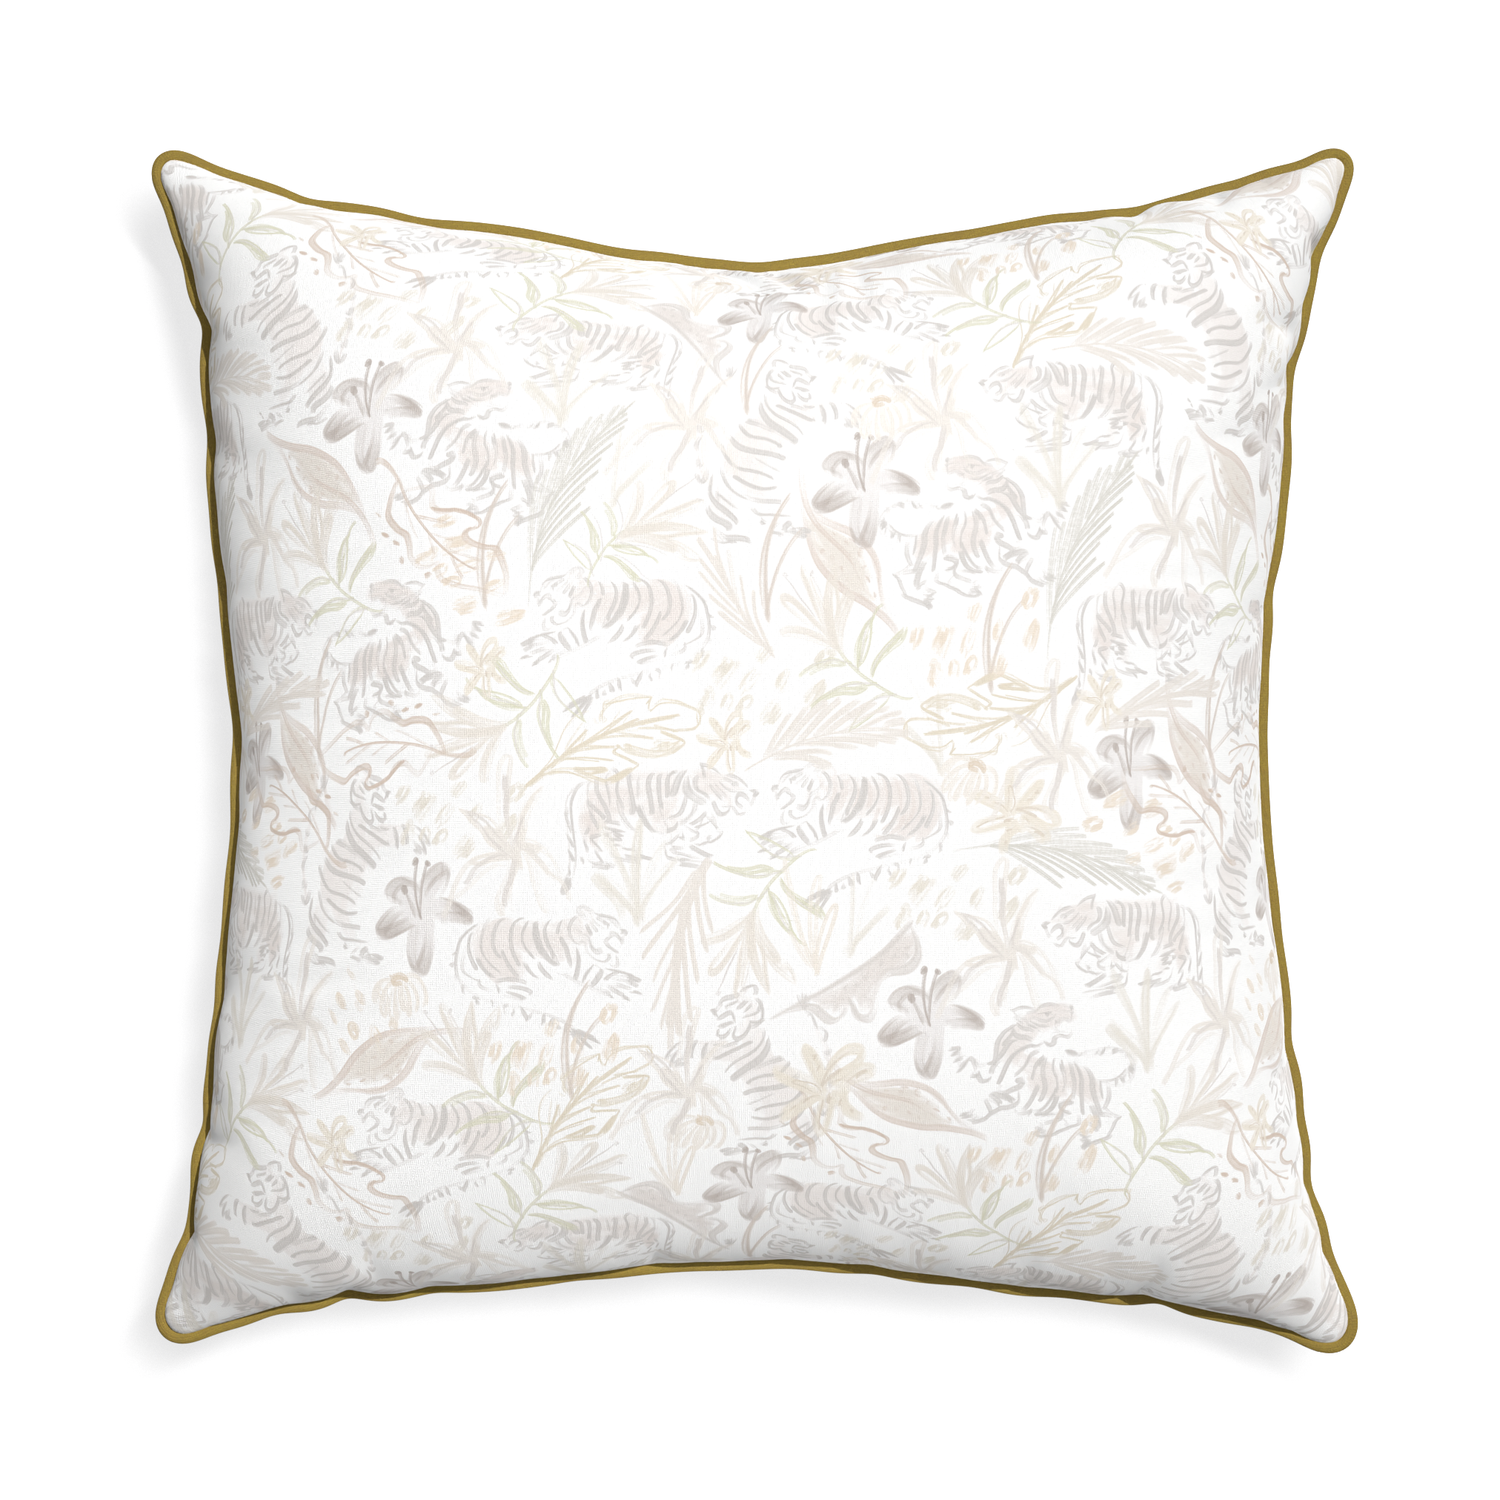 Euro-sham frida sand custom beige chinoiserie tigerpillow with c piping on white background